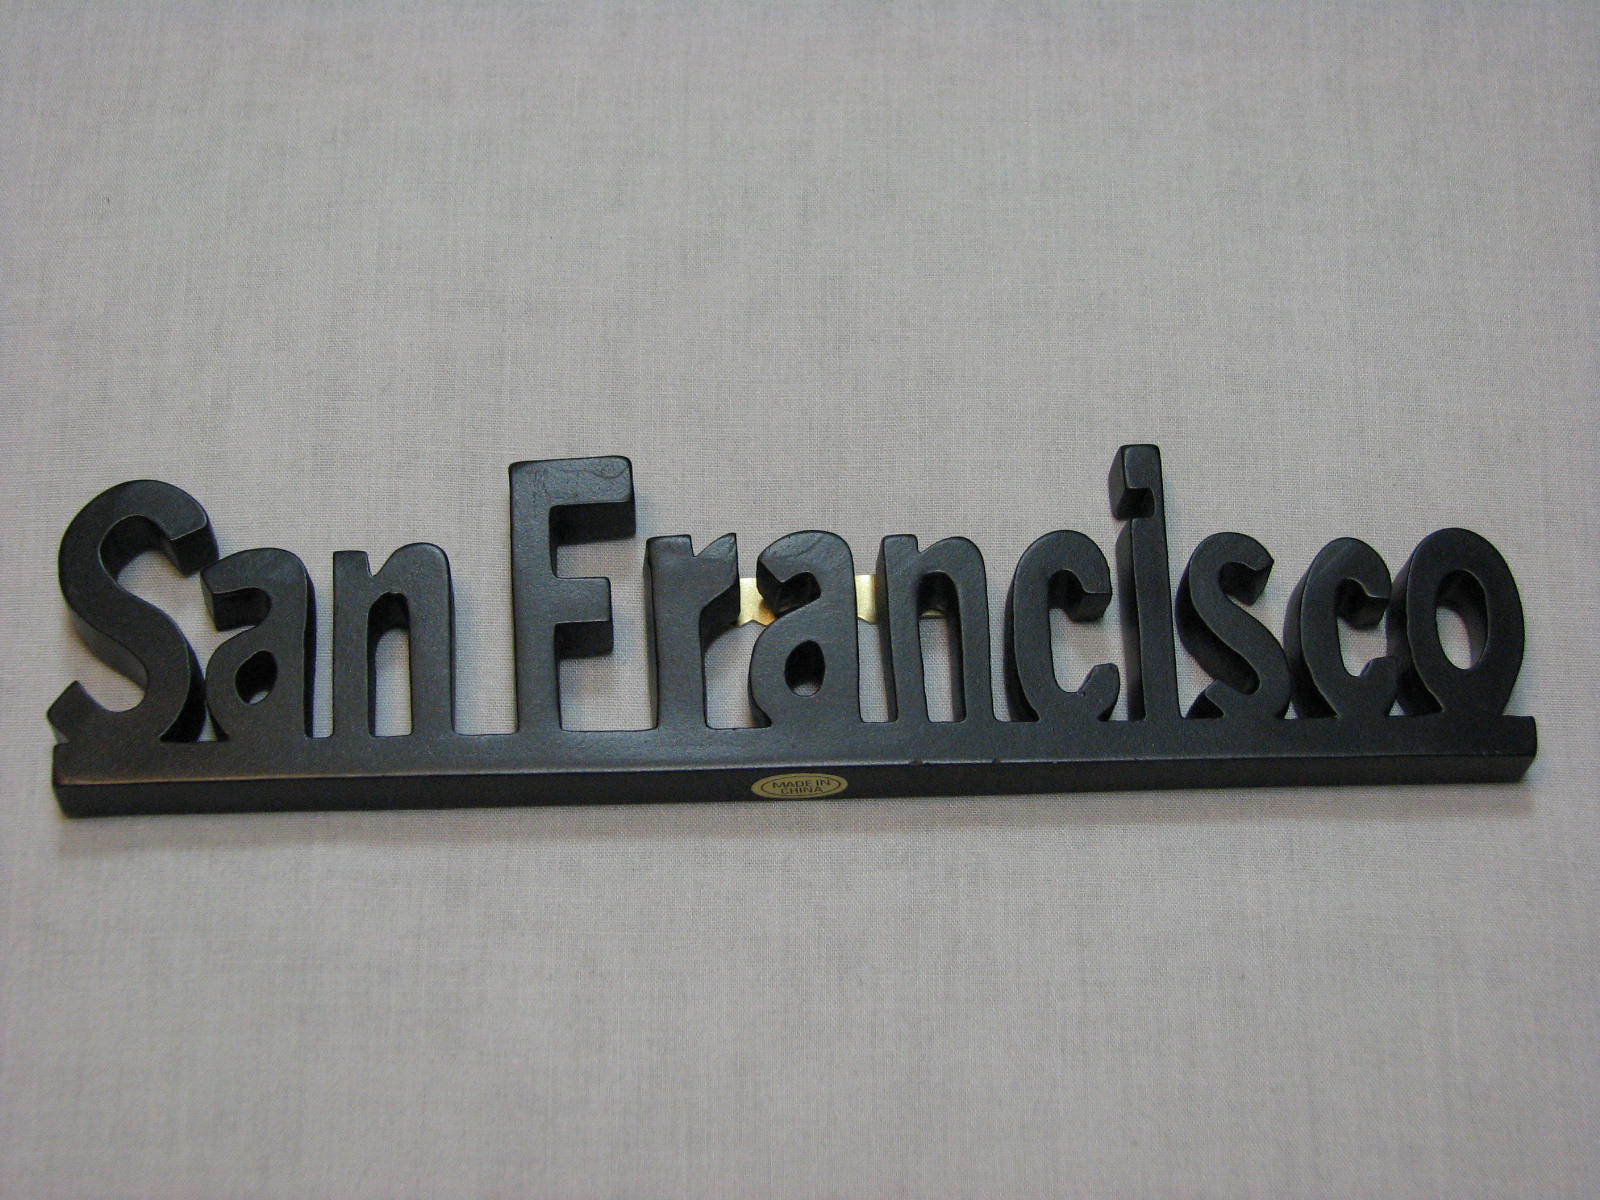 San Francisco City Name Cut Out Travel Wall Hanging Souviner Shelf Sitter Block